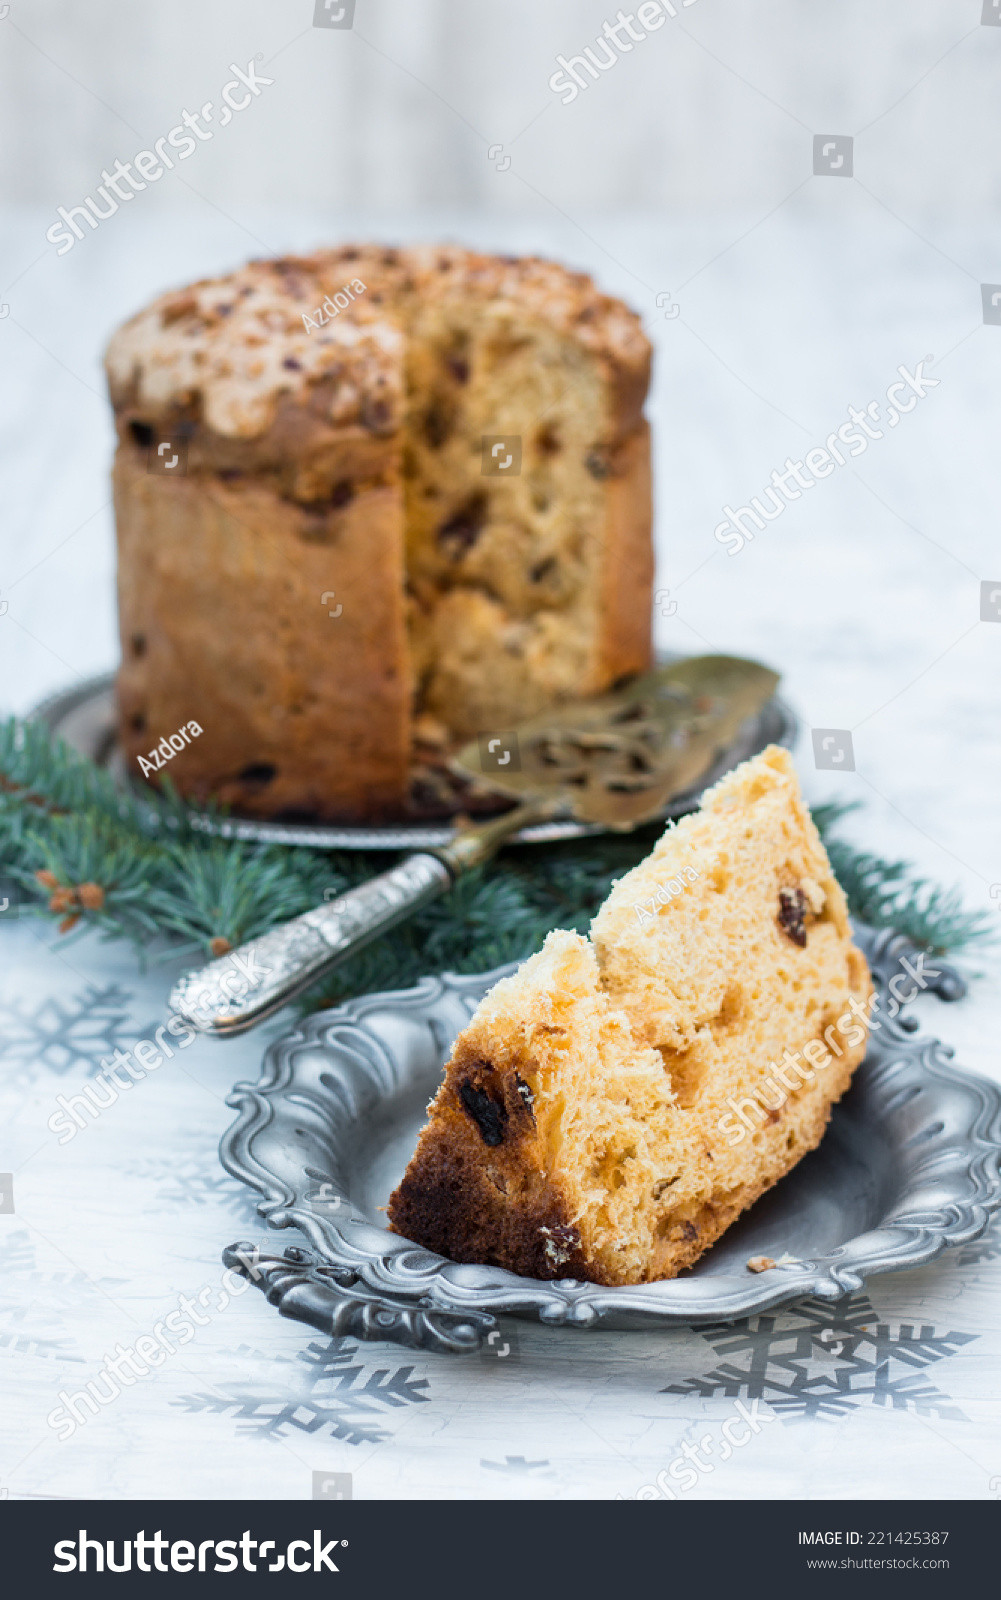 Top 21 Italian Sweet Bread Loaf Made for Christmas – Most Popular Ideas ...